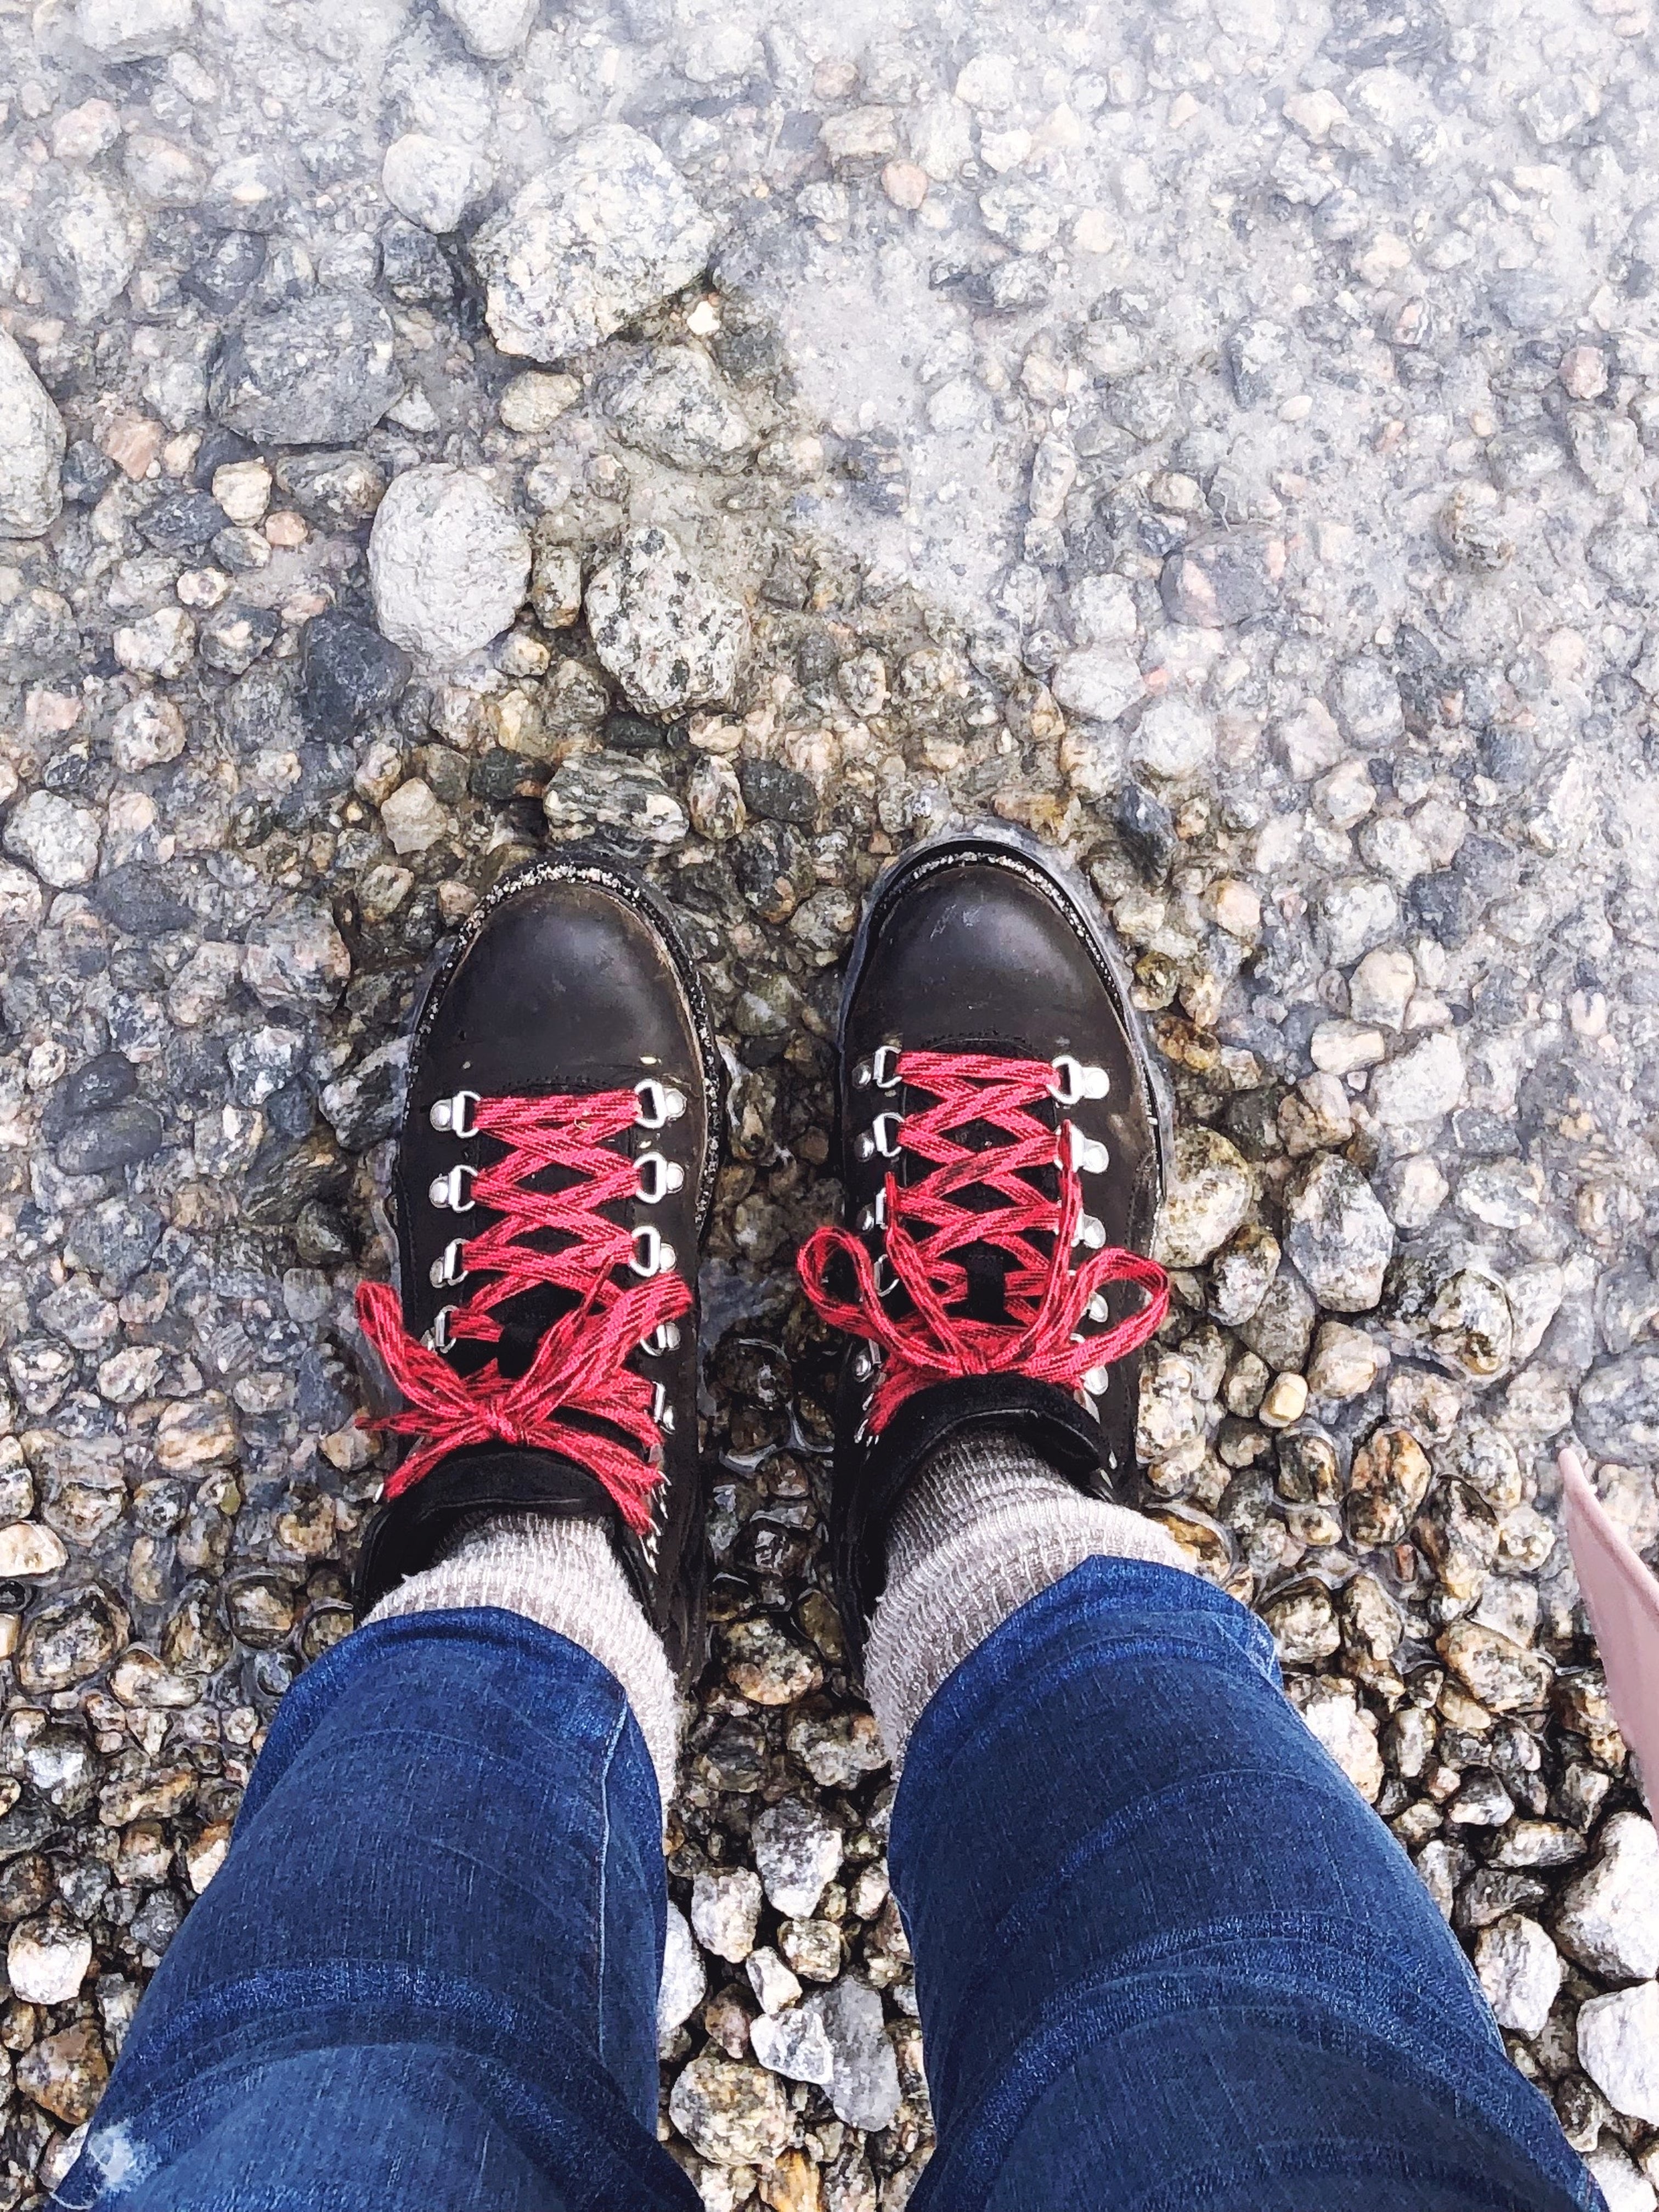 How to Style Hiking Boots for Fall